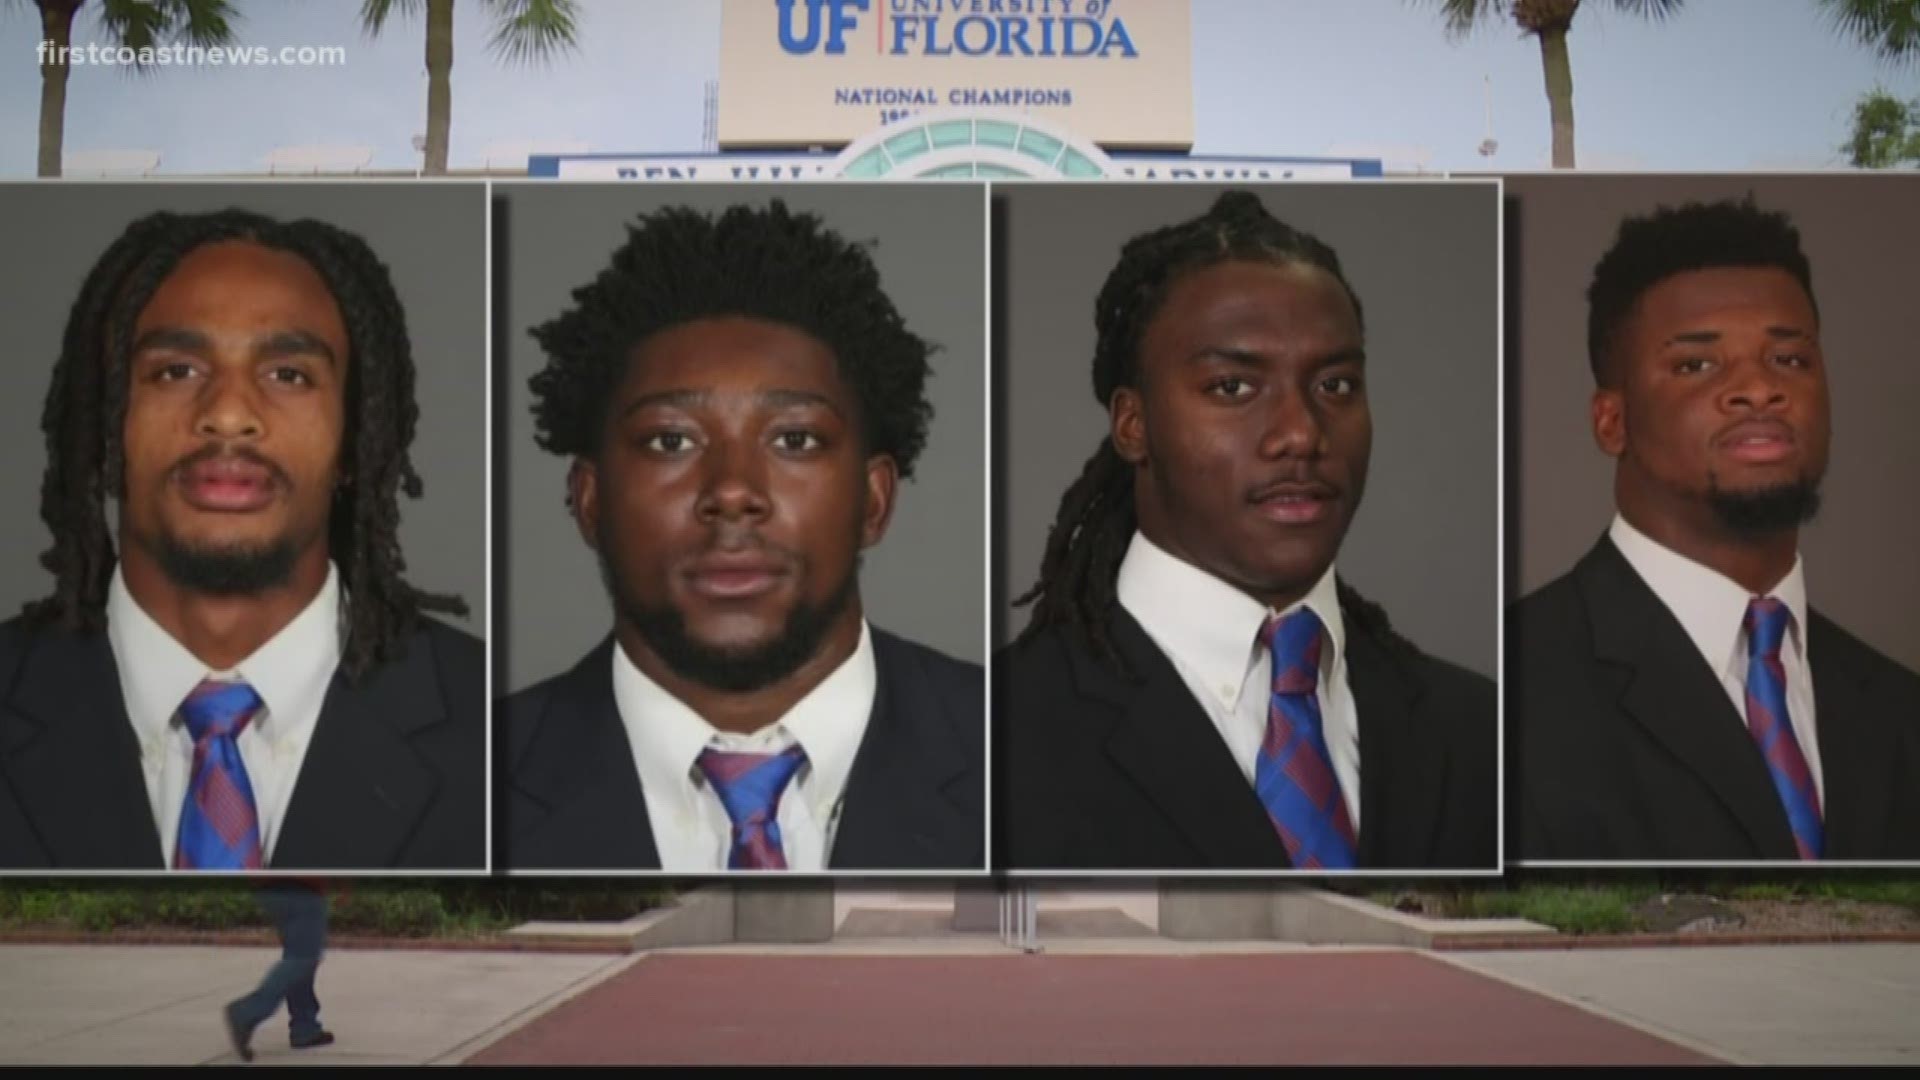 Multiple University of Florida football players face possible university discipline after an on-campus confrontation involving airsoft guns and lying to police.